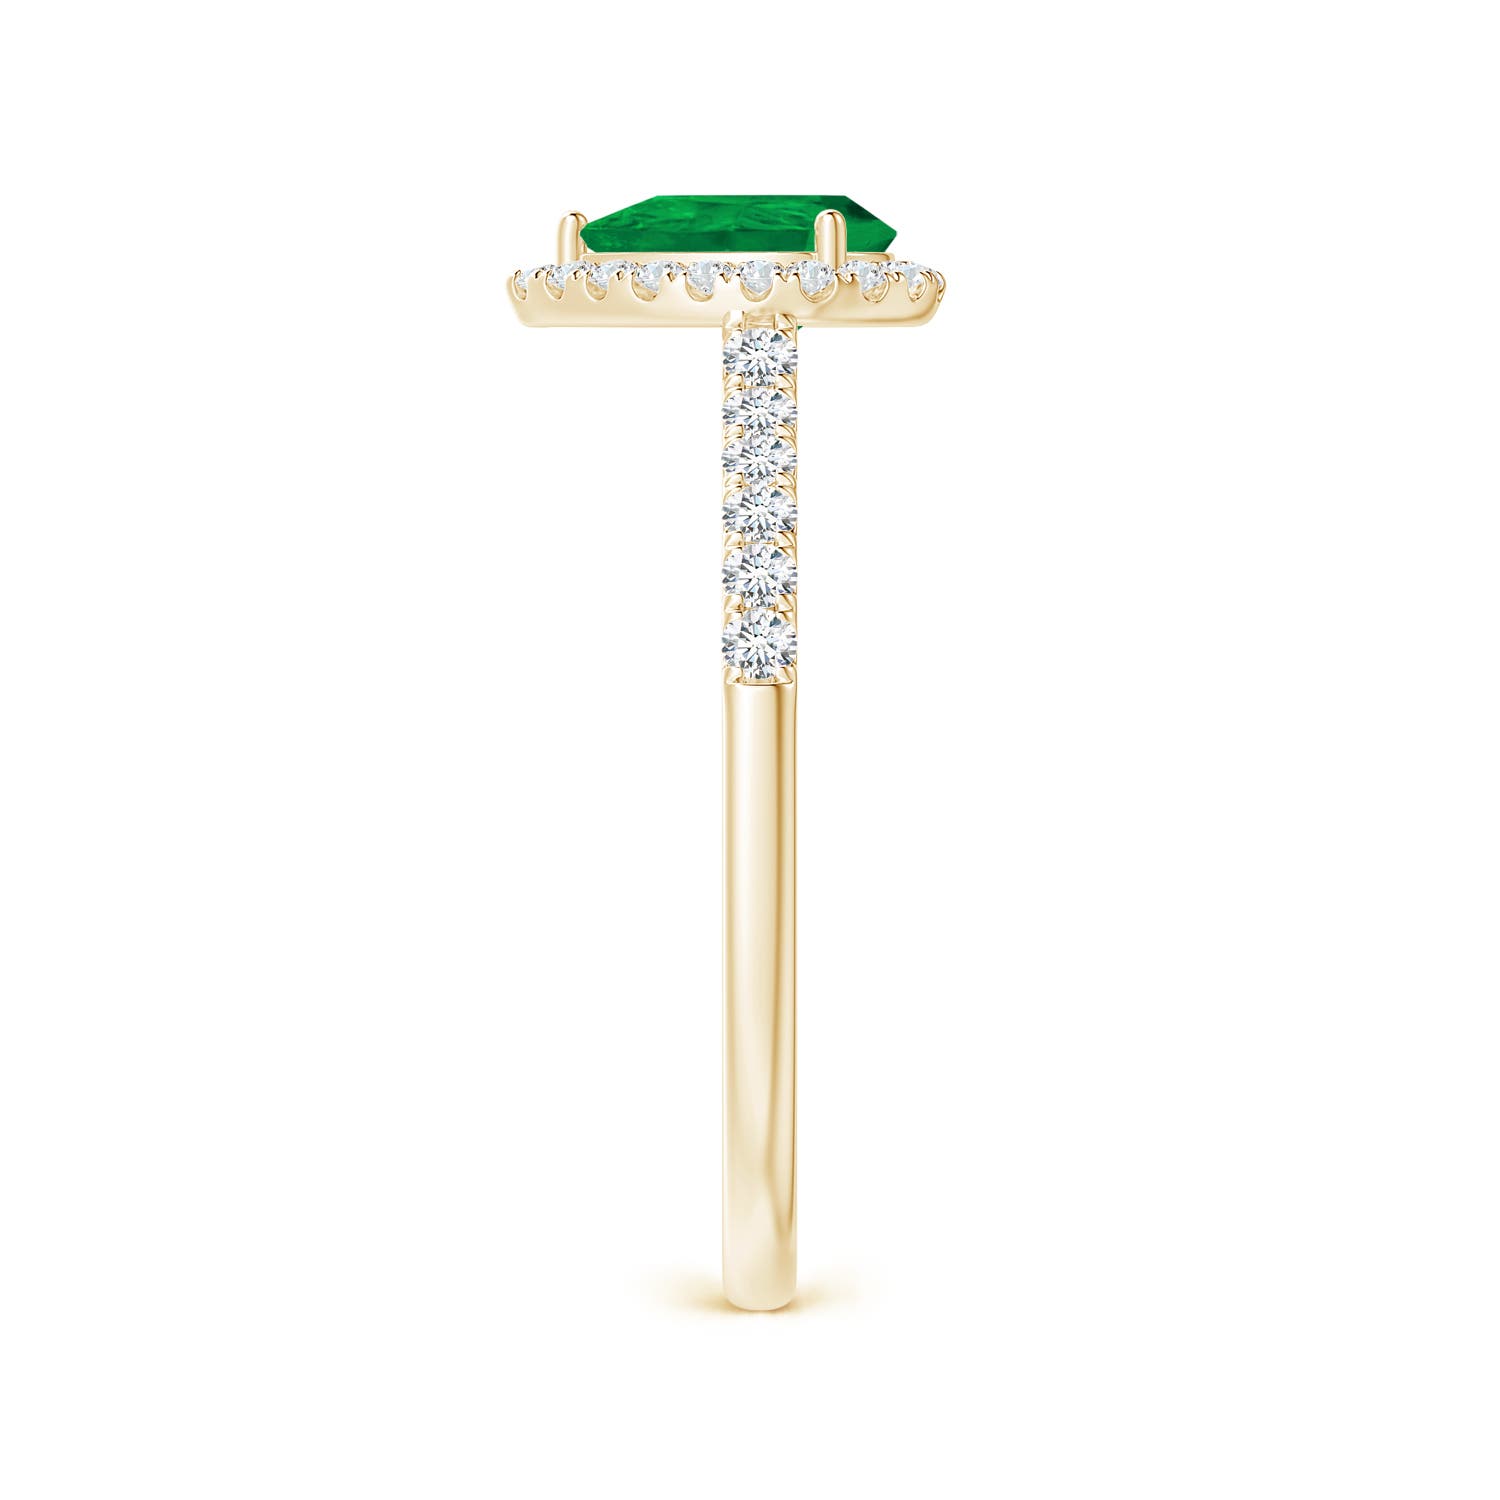 AA - Emerald / 0.88 CT / 14 KT Yellow Gold